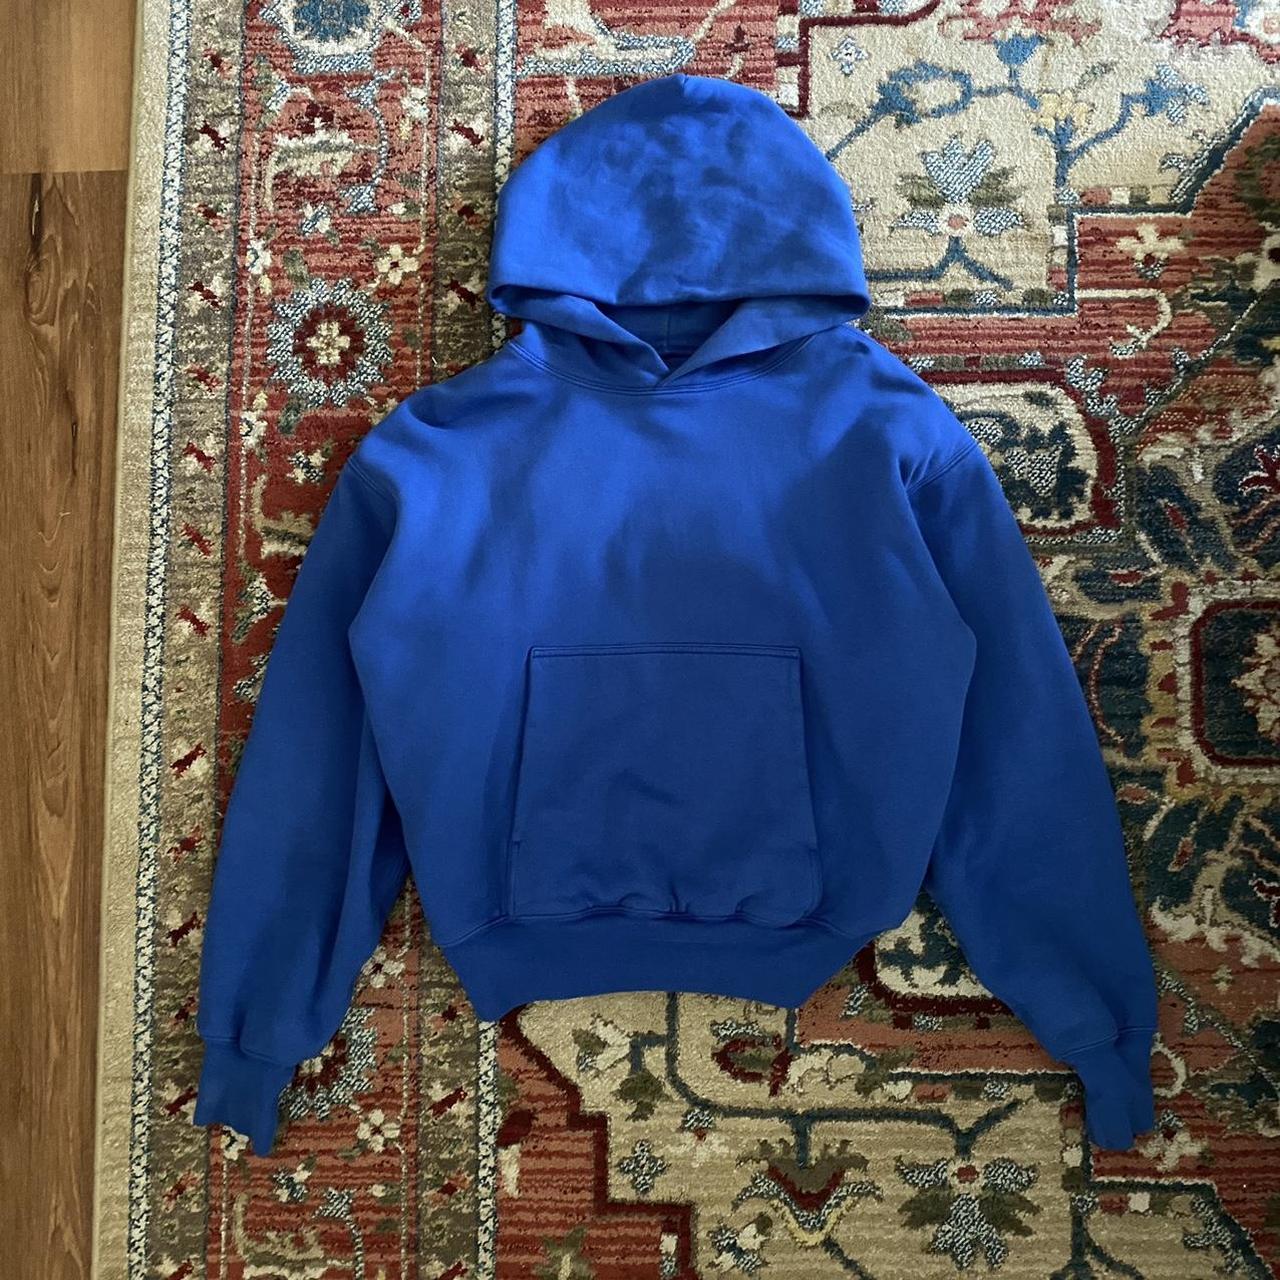 Yeezy gap double layered hoodie, Size small